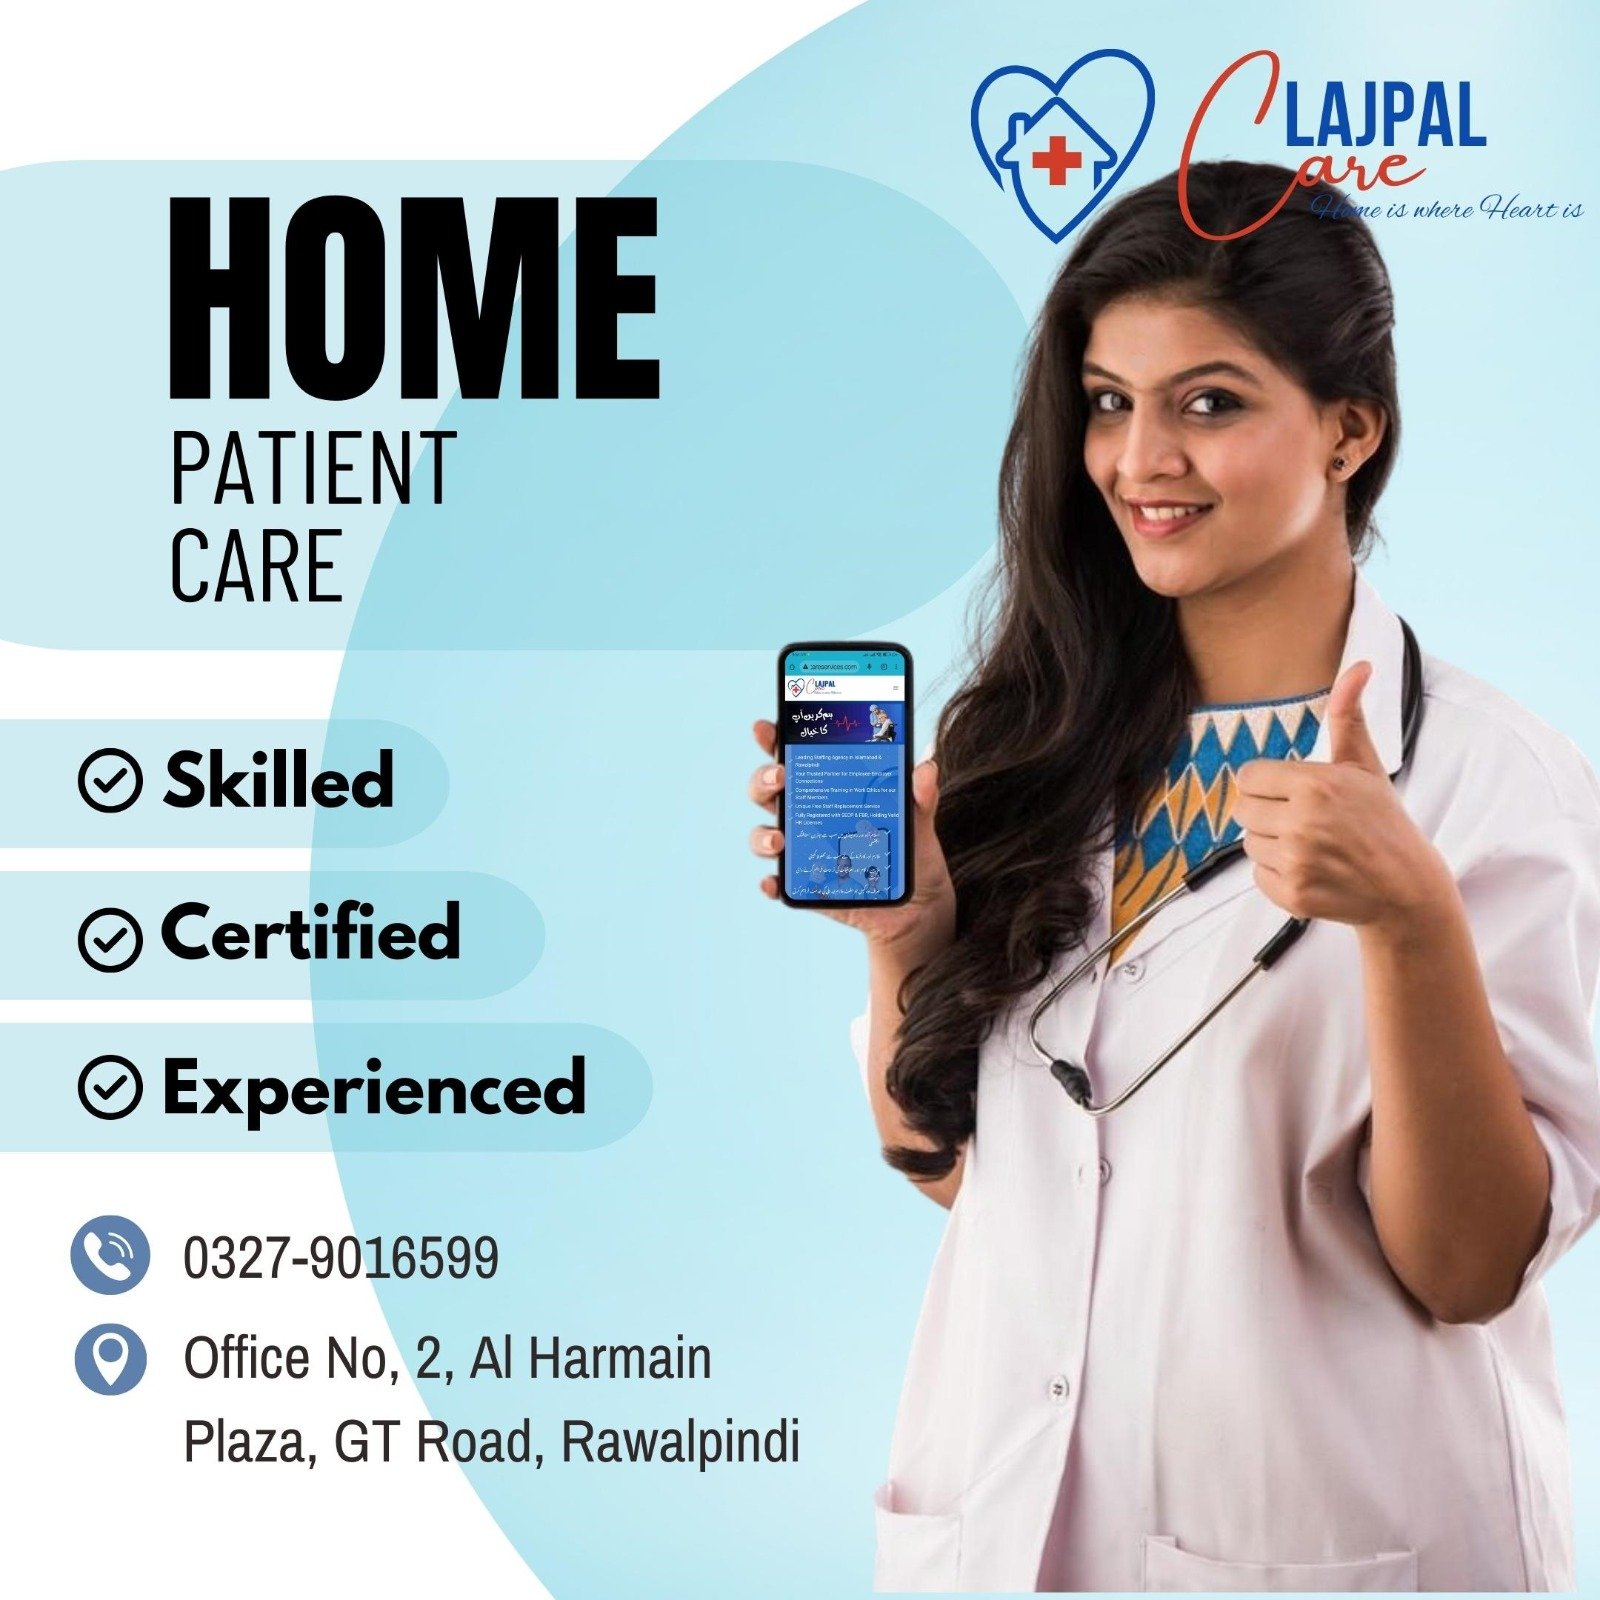 Home Care Services in Lahore